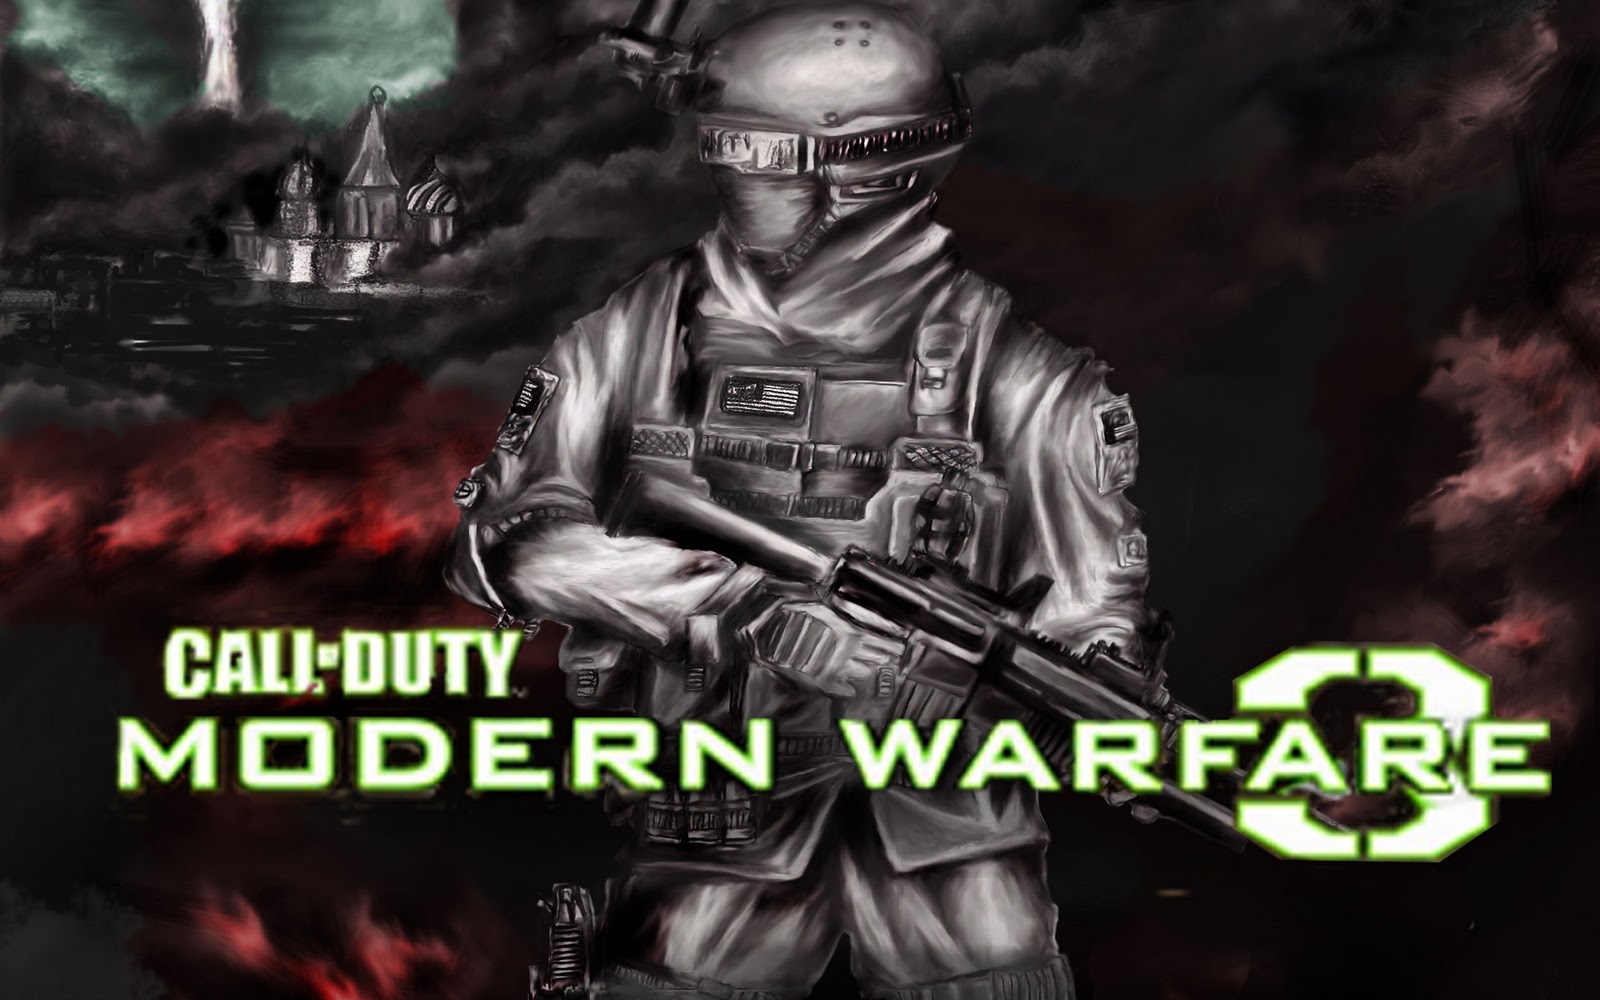 Free Download Technocage Call Of Duty Modern Warfare 3 Wallpaper In Hd 1600x1000 For Your Desktop Mobile Tablet Explore 50 Cod 3 Wallpaper Modern Warfare 3 Wallpaper Mw3 Wallpaper - call of duty modern warfare 3 roblox